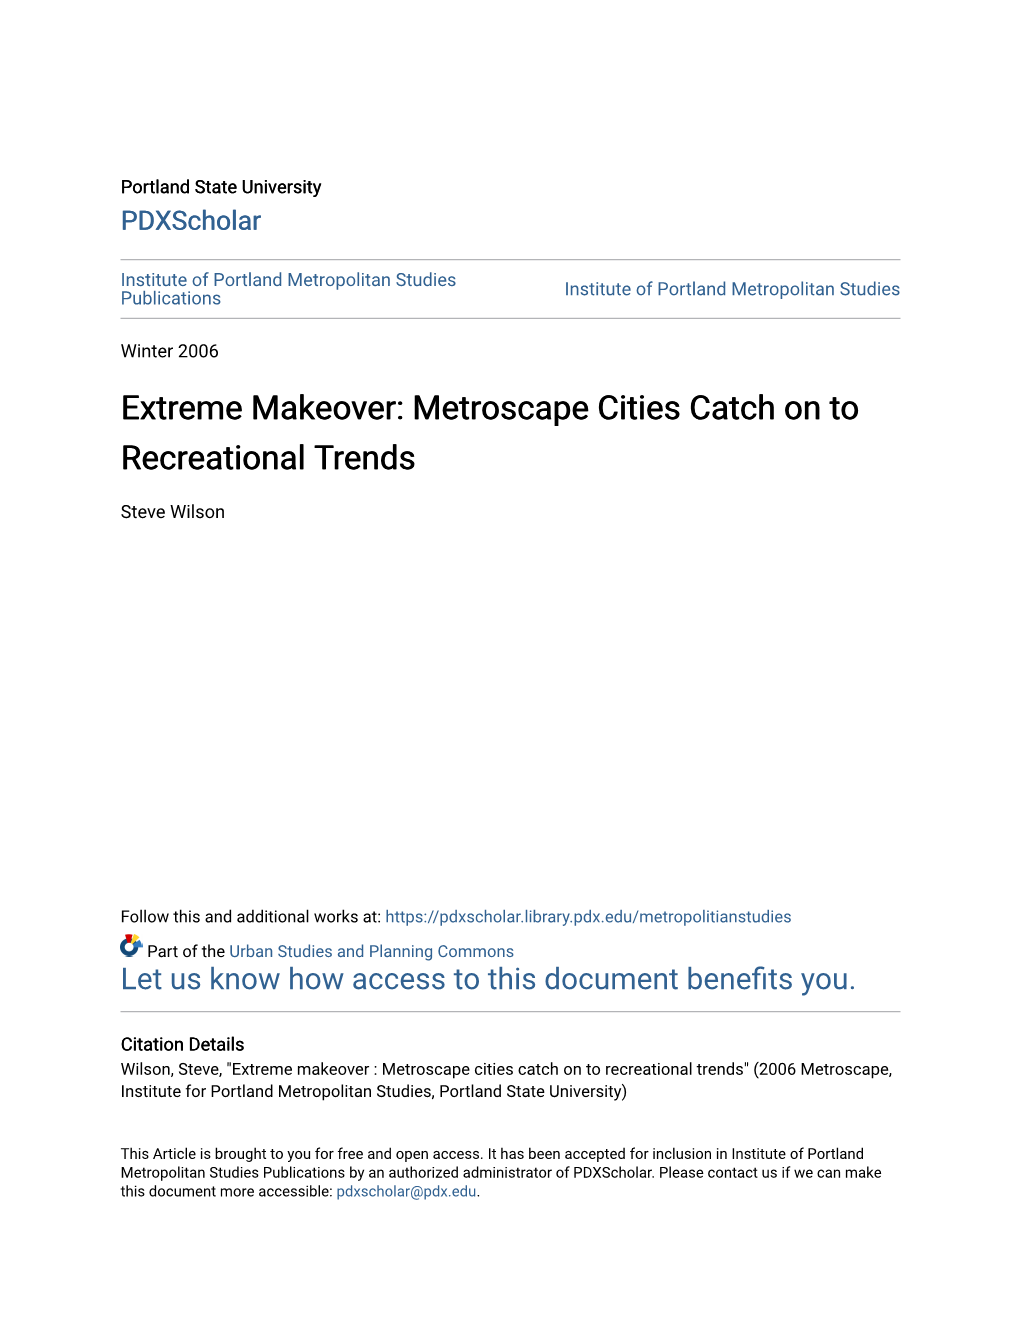 Extreme Makeover: Metroscape Cities Catch on to Recreational Trends